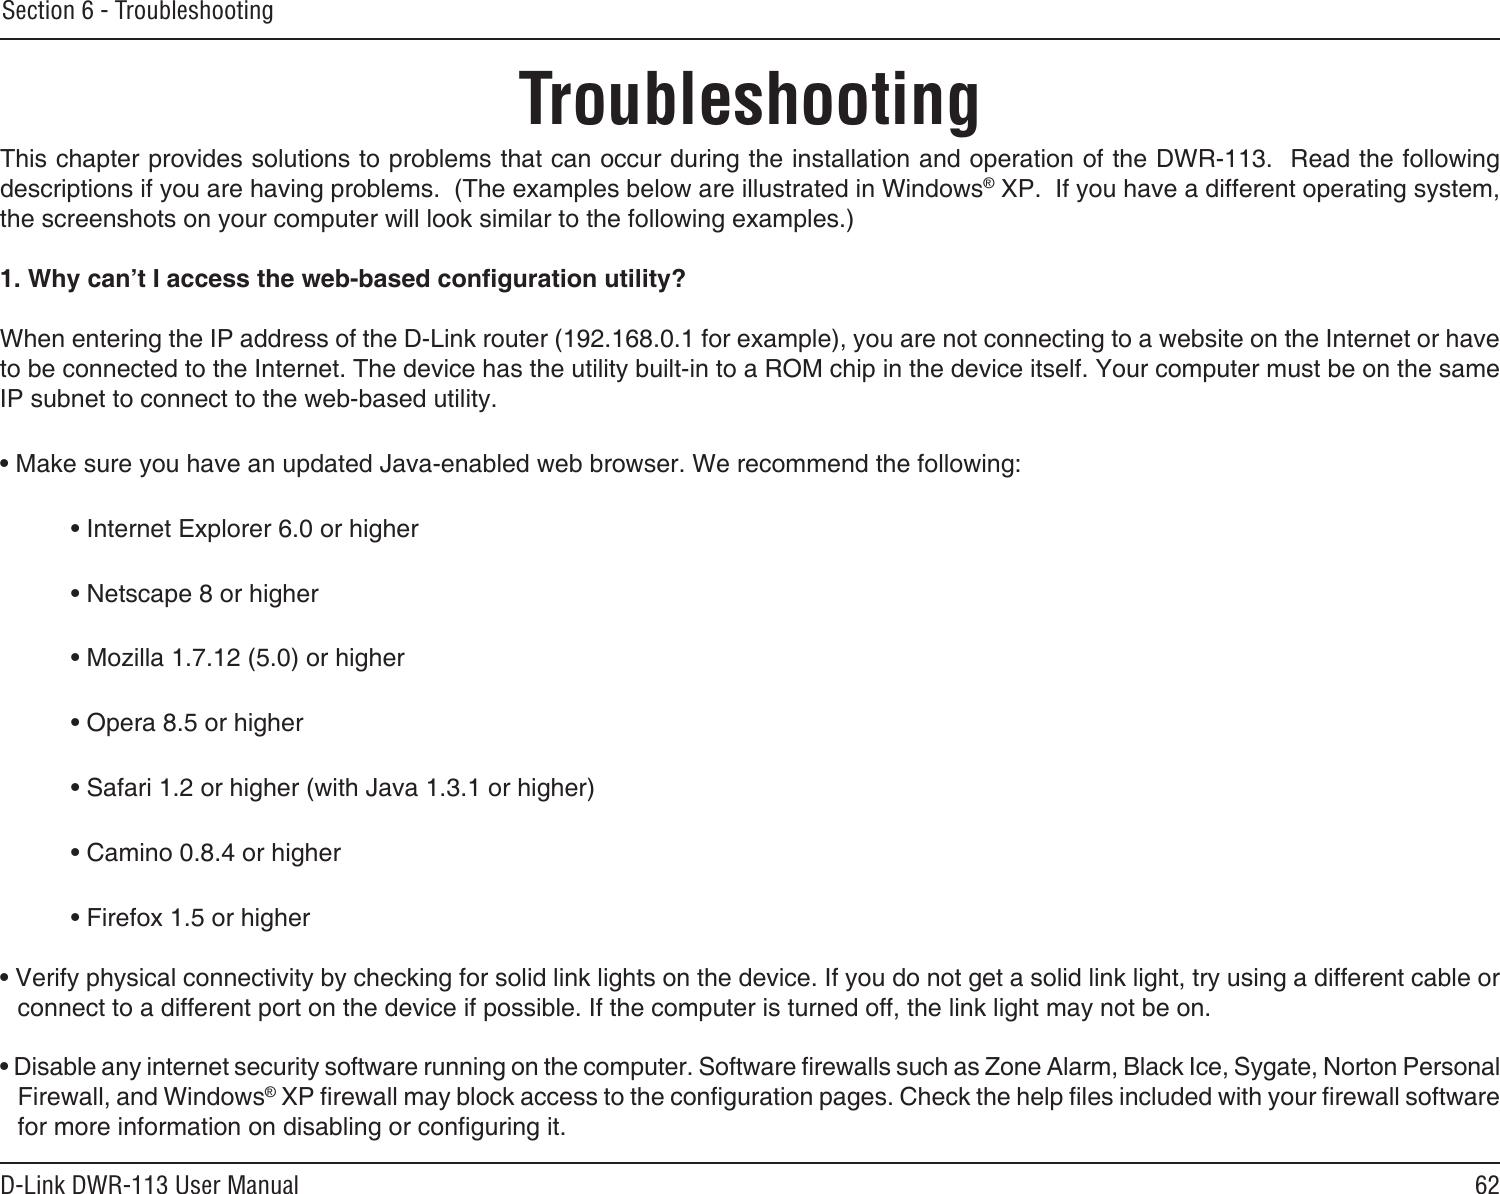 62D-Link DWR-113 User ManualSection 6 - TroubleshootingTroubleshootingThis chapter provides solutions to problems that can occur during the installation and operation of the DWR-113.  Read the following descriptions if you are having problems.  (The examples below are illustrated in Windows® XP.  If you have a different operating system, the screenshots on your computer will look similar to the following examples.)1. Why can’t I access the web-based conguration utility?When entering the IP address of the D-Link router (192.168.0.1 for example), you are not connecting to a website on the Internet or have to be connected to the Internet. The device has the utility built-in to a ROM chip in the device itself. Your computer must be on the same IP subnet to connect to the web-based utility. • Make sure you have an updated Java-enabled web browser. We recommend the following: • Internet Explorer 6.0 or higher • Netscape 8 or higher • Mozilla 1.7.12 (5.0) or higher • Opera 8.5 or higher • Safari 1.2 or higher (with Java 1.3.1 or higher) • Camino 0.8.4 or higher • Firefox 1.5 or higher • Verify physical connectivity by checking for solid link lights on the device. If you do not get a solid link light, try using a different cable or connect to a different port on the device if possible. If the computer is turned off, the link light may not be on.• Disable any internet security software running on the computer. Software rewalls such as Zone Alarm, Black Ice, Sygate, Norton Personal Firewall, and Windows® XP rewall may block access to the conguration pages. Check the help les included with your rewall software for more information on disabling or conguring it.